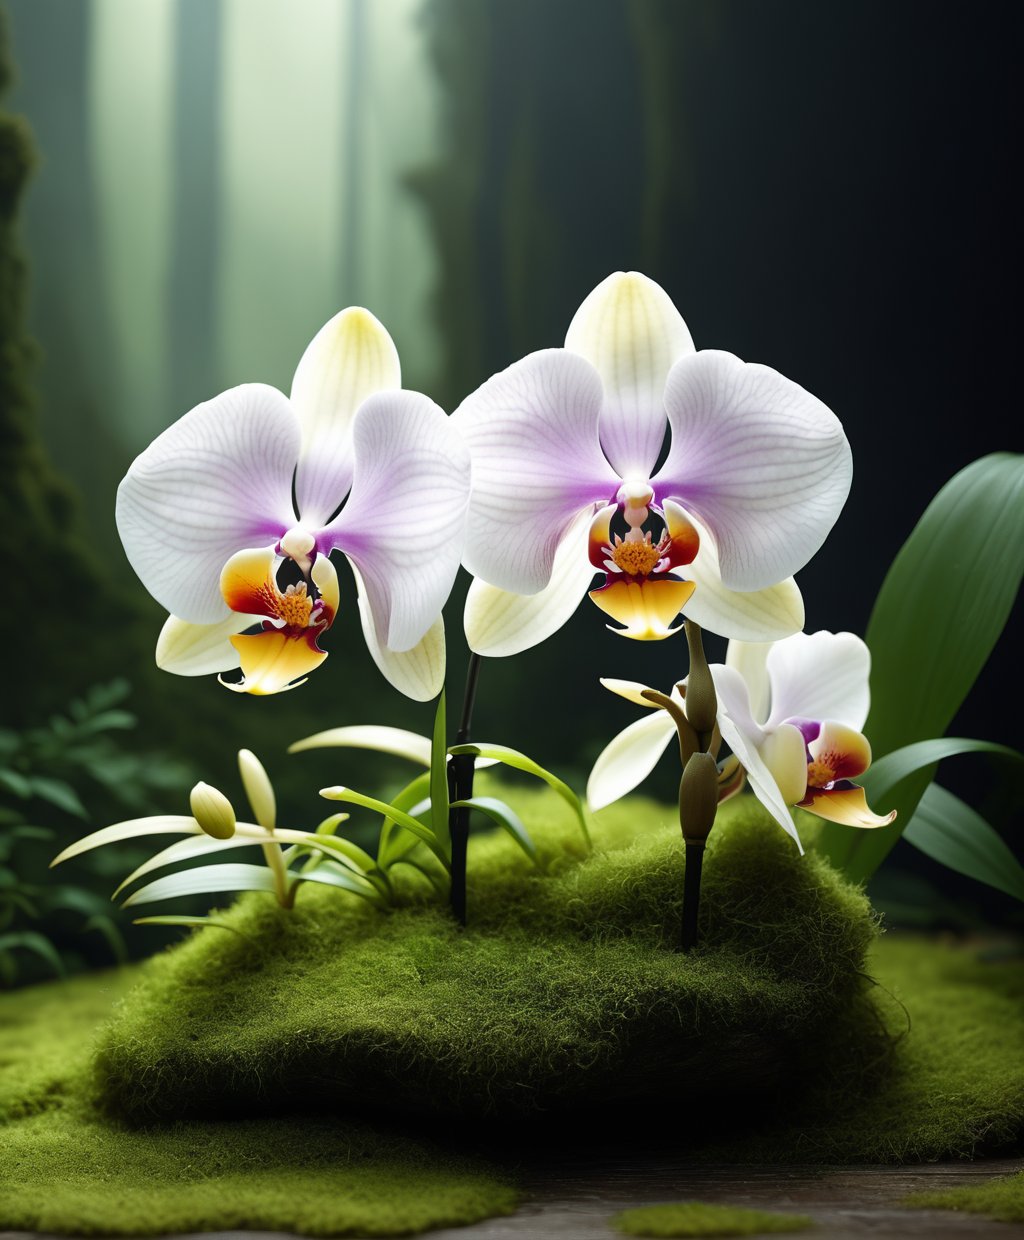 (Bipolar Professional 3D rendering:1.3) of (Simple illustration:1.3) On a moss covered background, two beautiful orchids are presented in a Helios 44-2 58mm f/2 style. This work combines ultra realistic animal illustrations and realistic rendering effects, with white and aquamarine as the main tones. Inspired by Flickr and Mori style, creating captivating lighting effects.,cg rendering,volume lighting,(by Artist Wadim Kashin:1.3),(by Artist Arthur Rackham:1.3),(by Artist Mike Allred:1.3),CGSociety,ArtStation,(Hipster Art:1.3),(Shin Hanga:1.3),(Health Goth Art:1.3),(Kodak Portra:1.3)